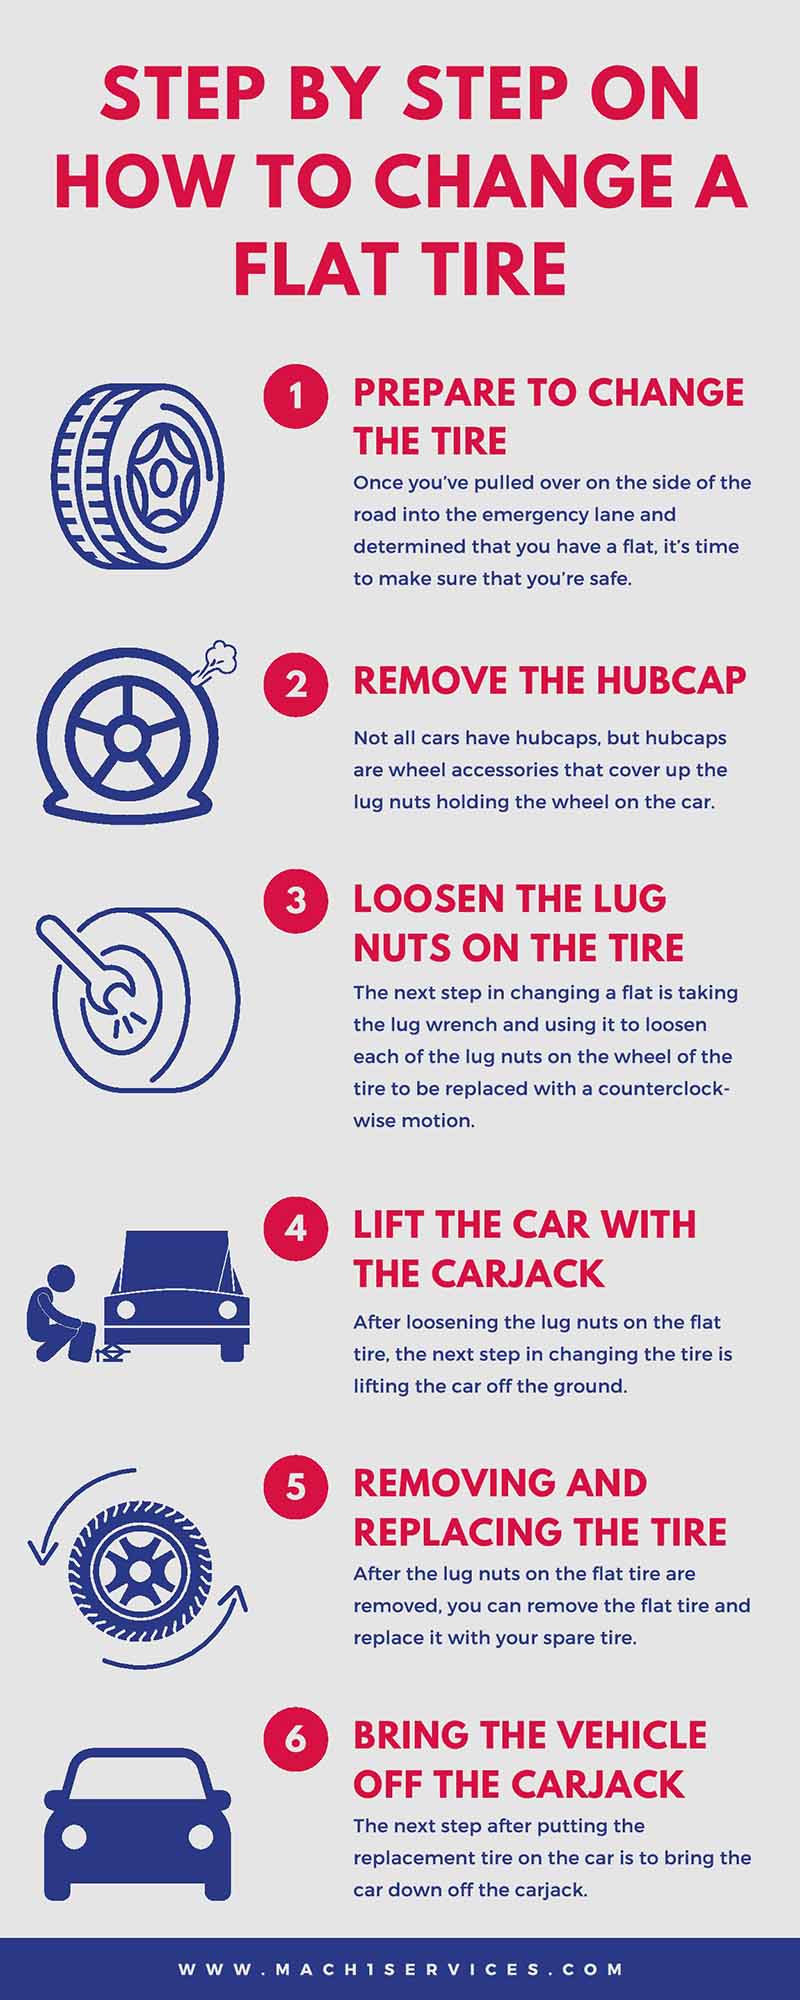 Step By Step on How to Change a Flat Tire - Mach 1 Services